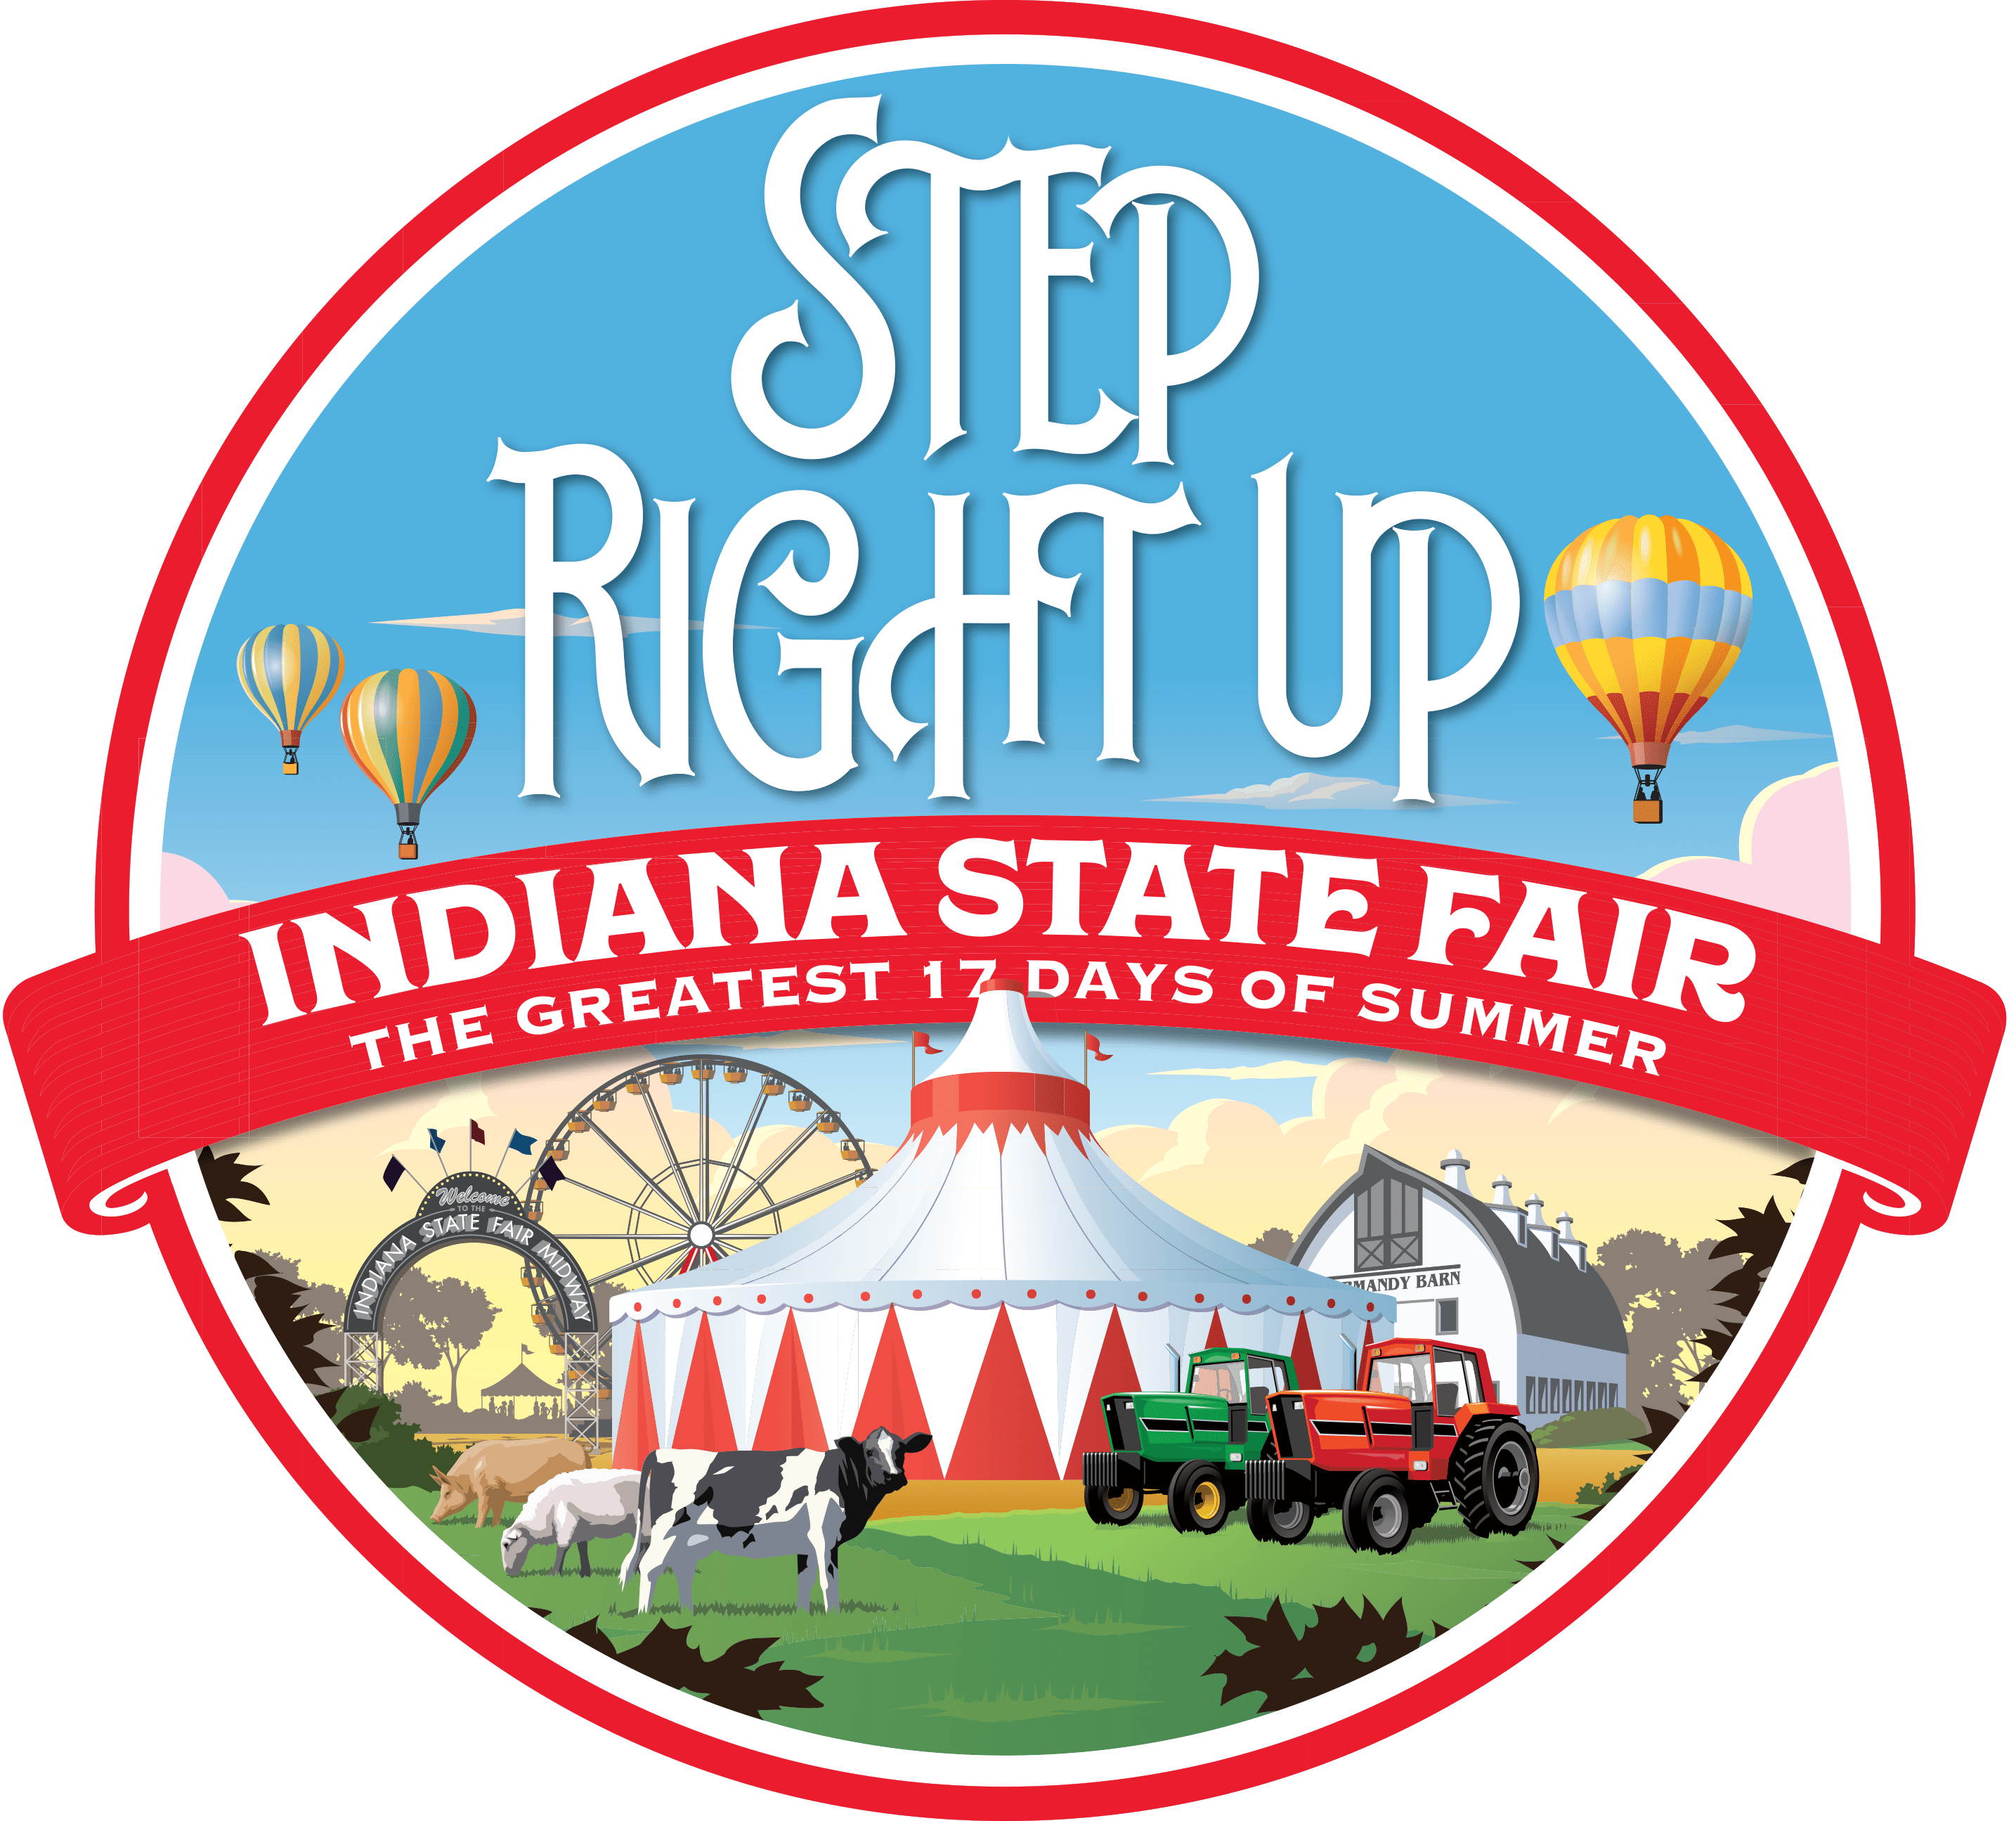 The Indiana State Fair is coming back this summer